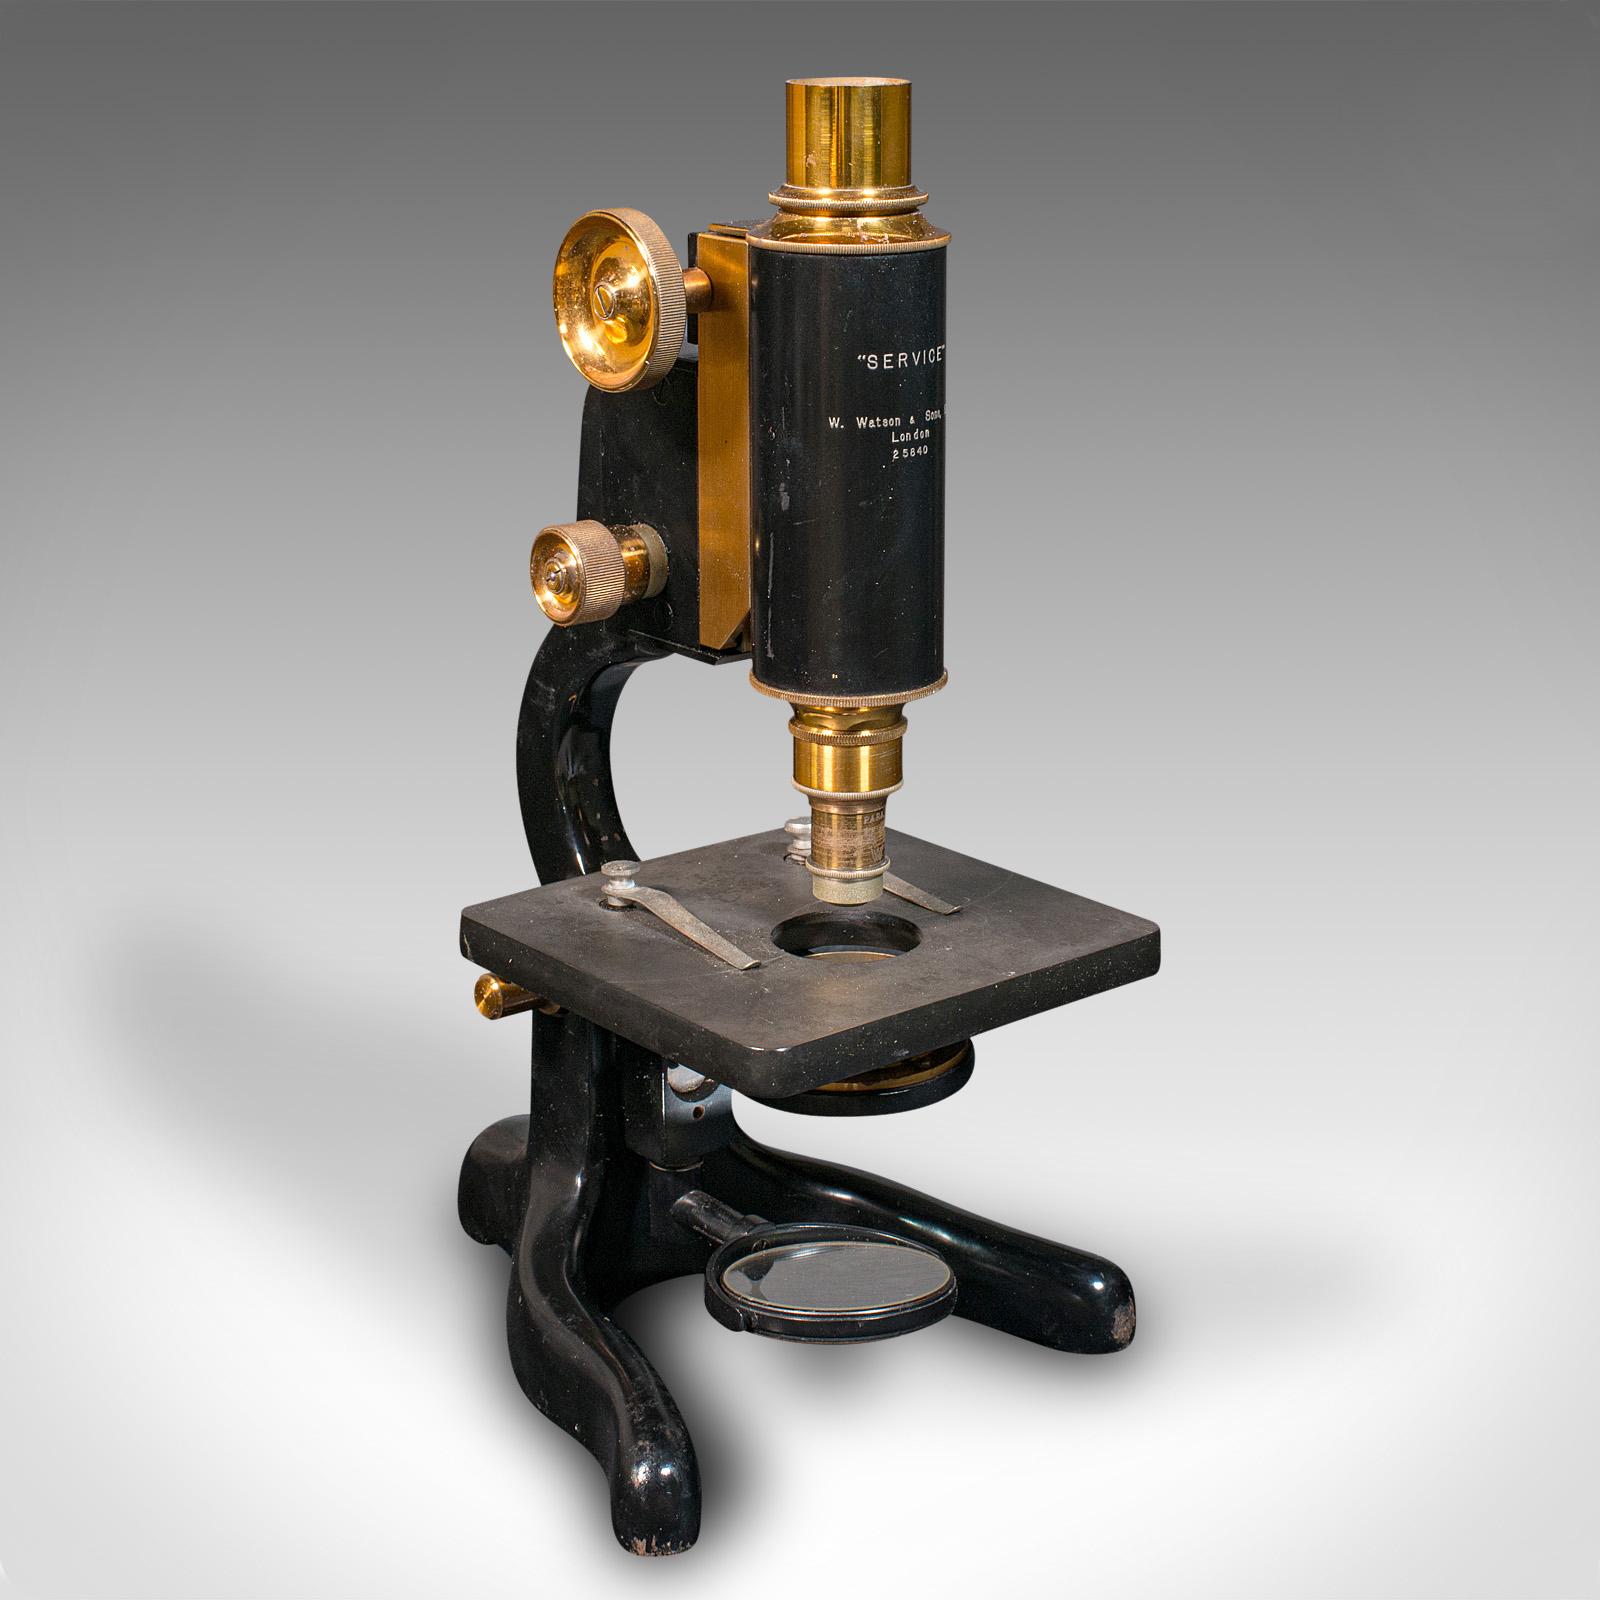 This is an antique cased microscope. An English, enamelled metal and brass scientific instrument by W. Watson of London, dating to the early 20th century, circa 1920.

Attractive and appealing scientific instrument, of good quality
Displays a